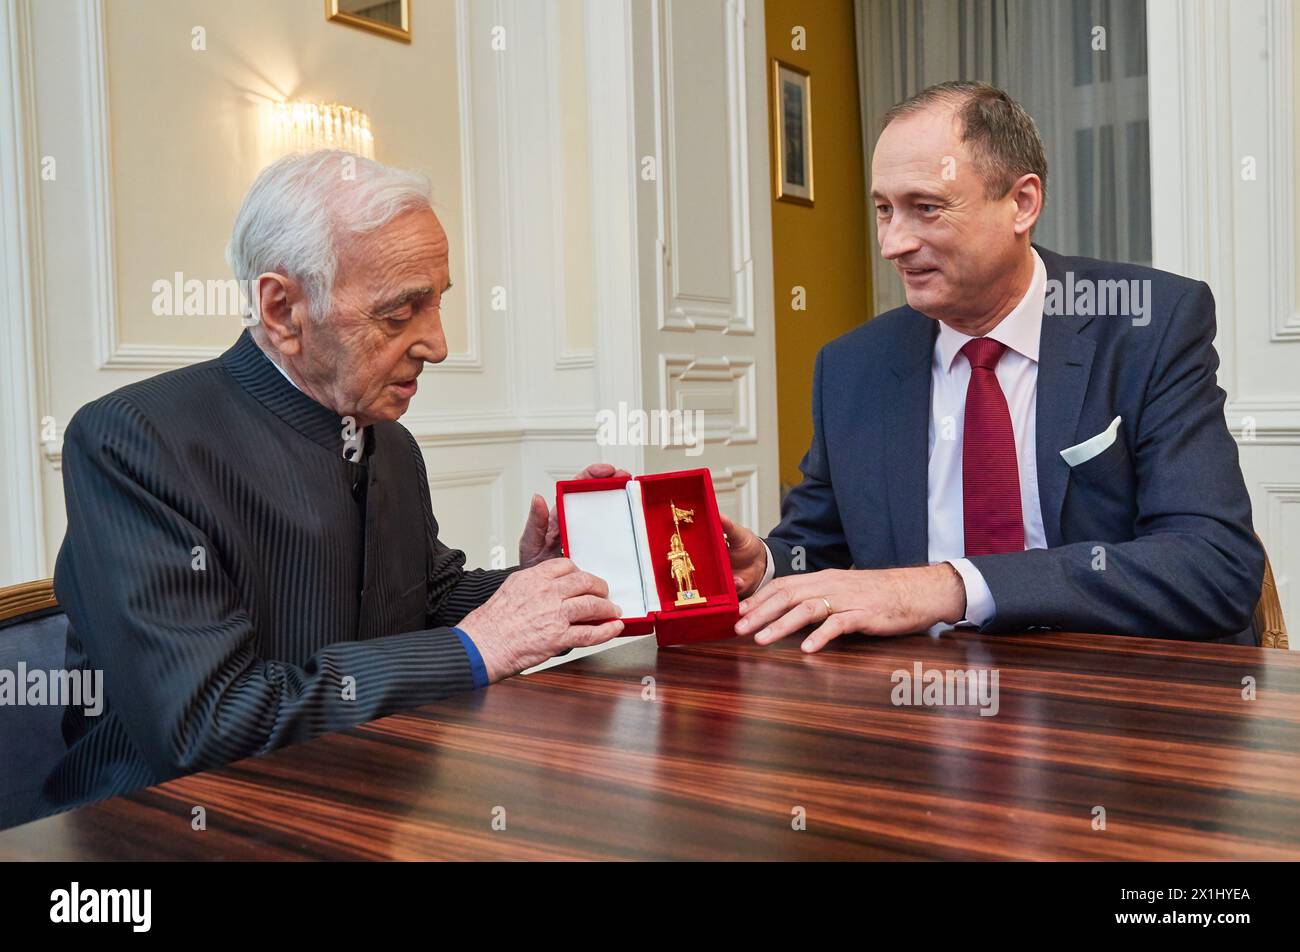 Chanson singer Charles AZNAVOUR receives the 'Golden Rathausmann', a Medal for Service to the City of Vienna from Andreas Mailath Pokorny, in Vienna, Austria, 8. December 2017. - 20171208 PD6923 - Rechteinfo: Rights Managed (RM) Stock Photo